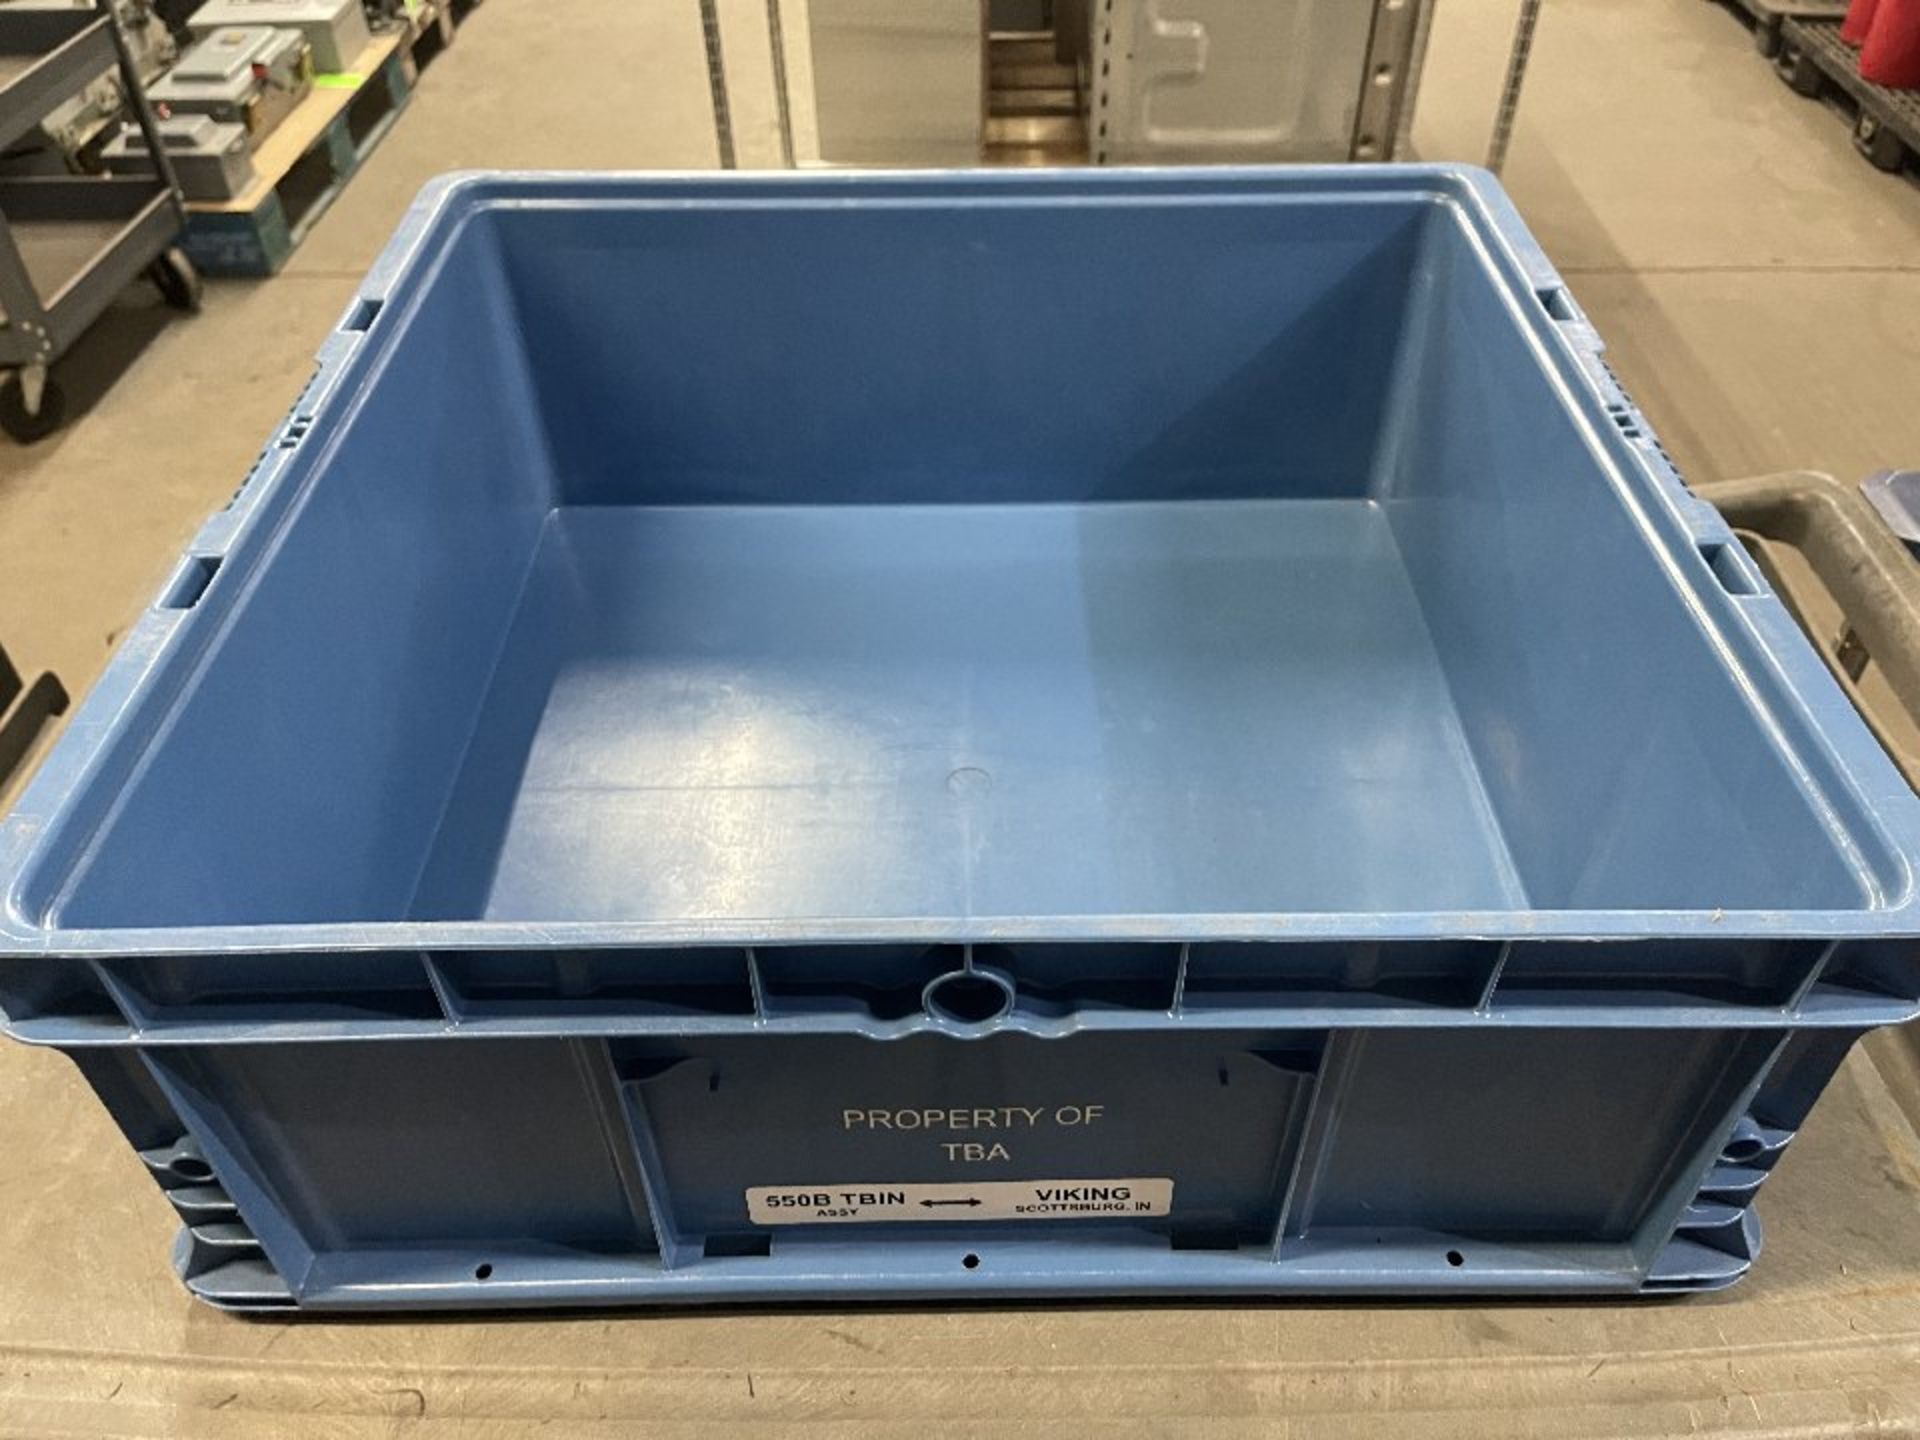 Orbis Plastic Straight Wall Containers - Image 2 of 2